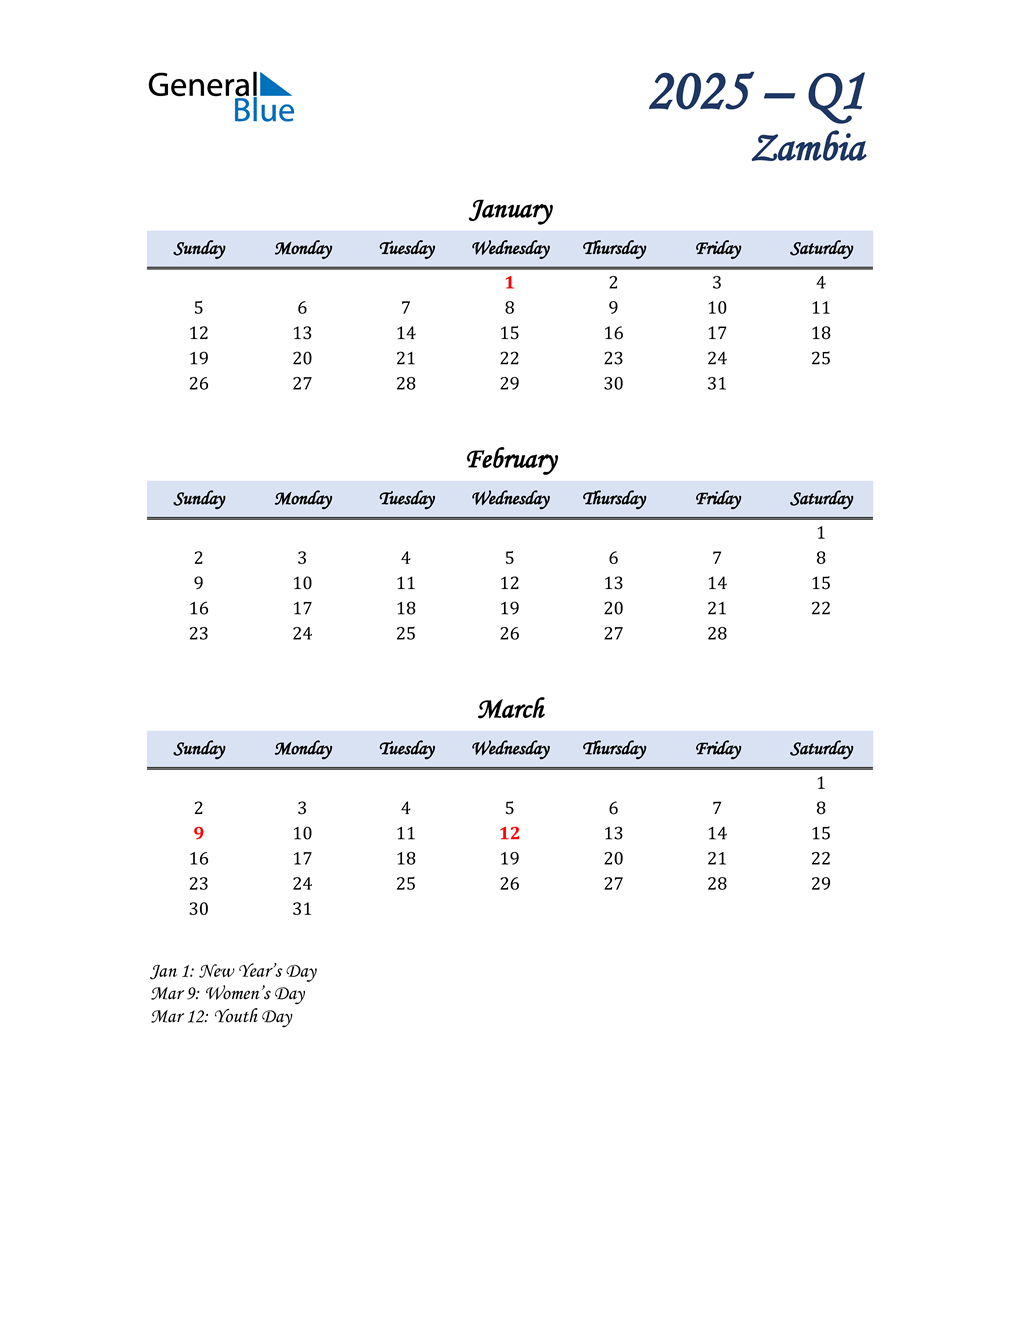  January, February, and March Calendar for Zambia